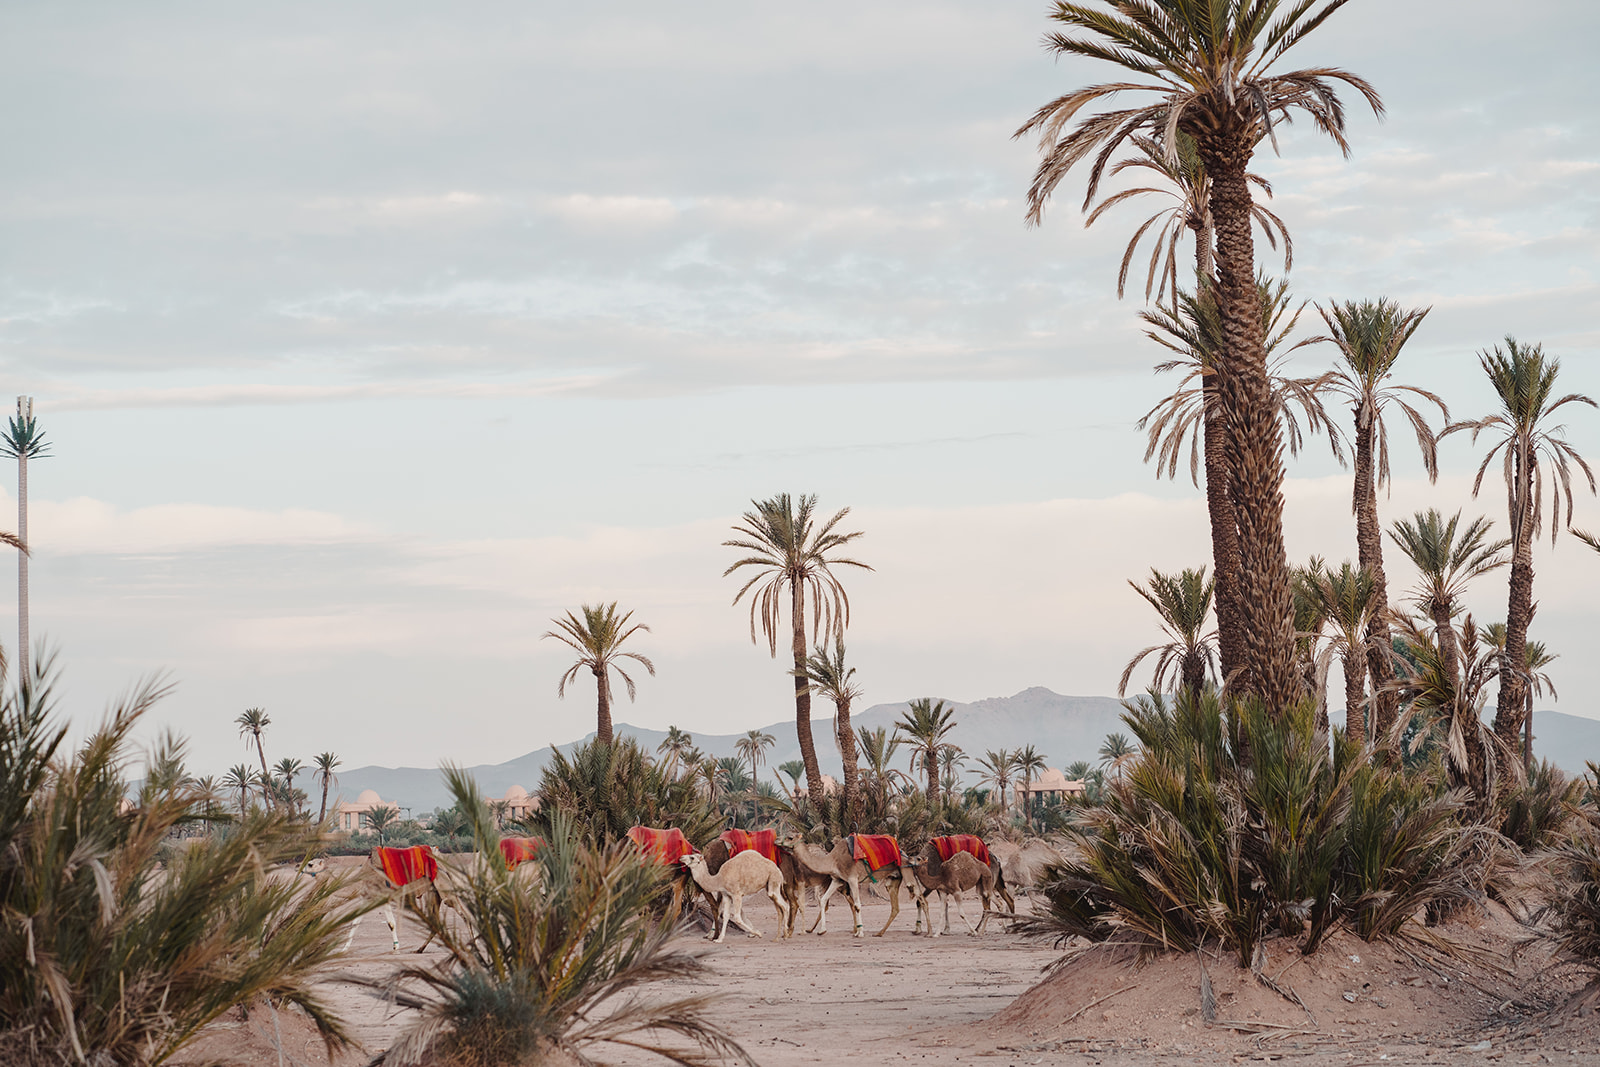 Camels walking through the Moroccan dessert at sunrise